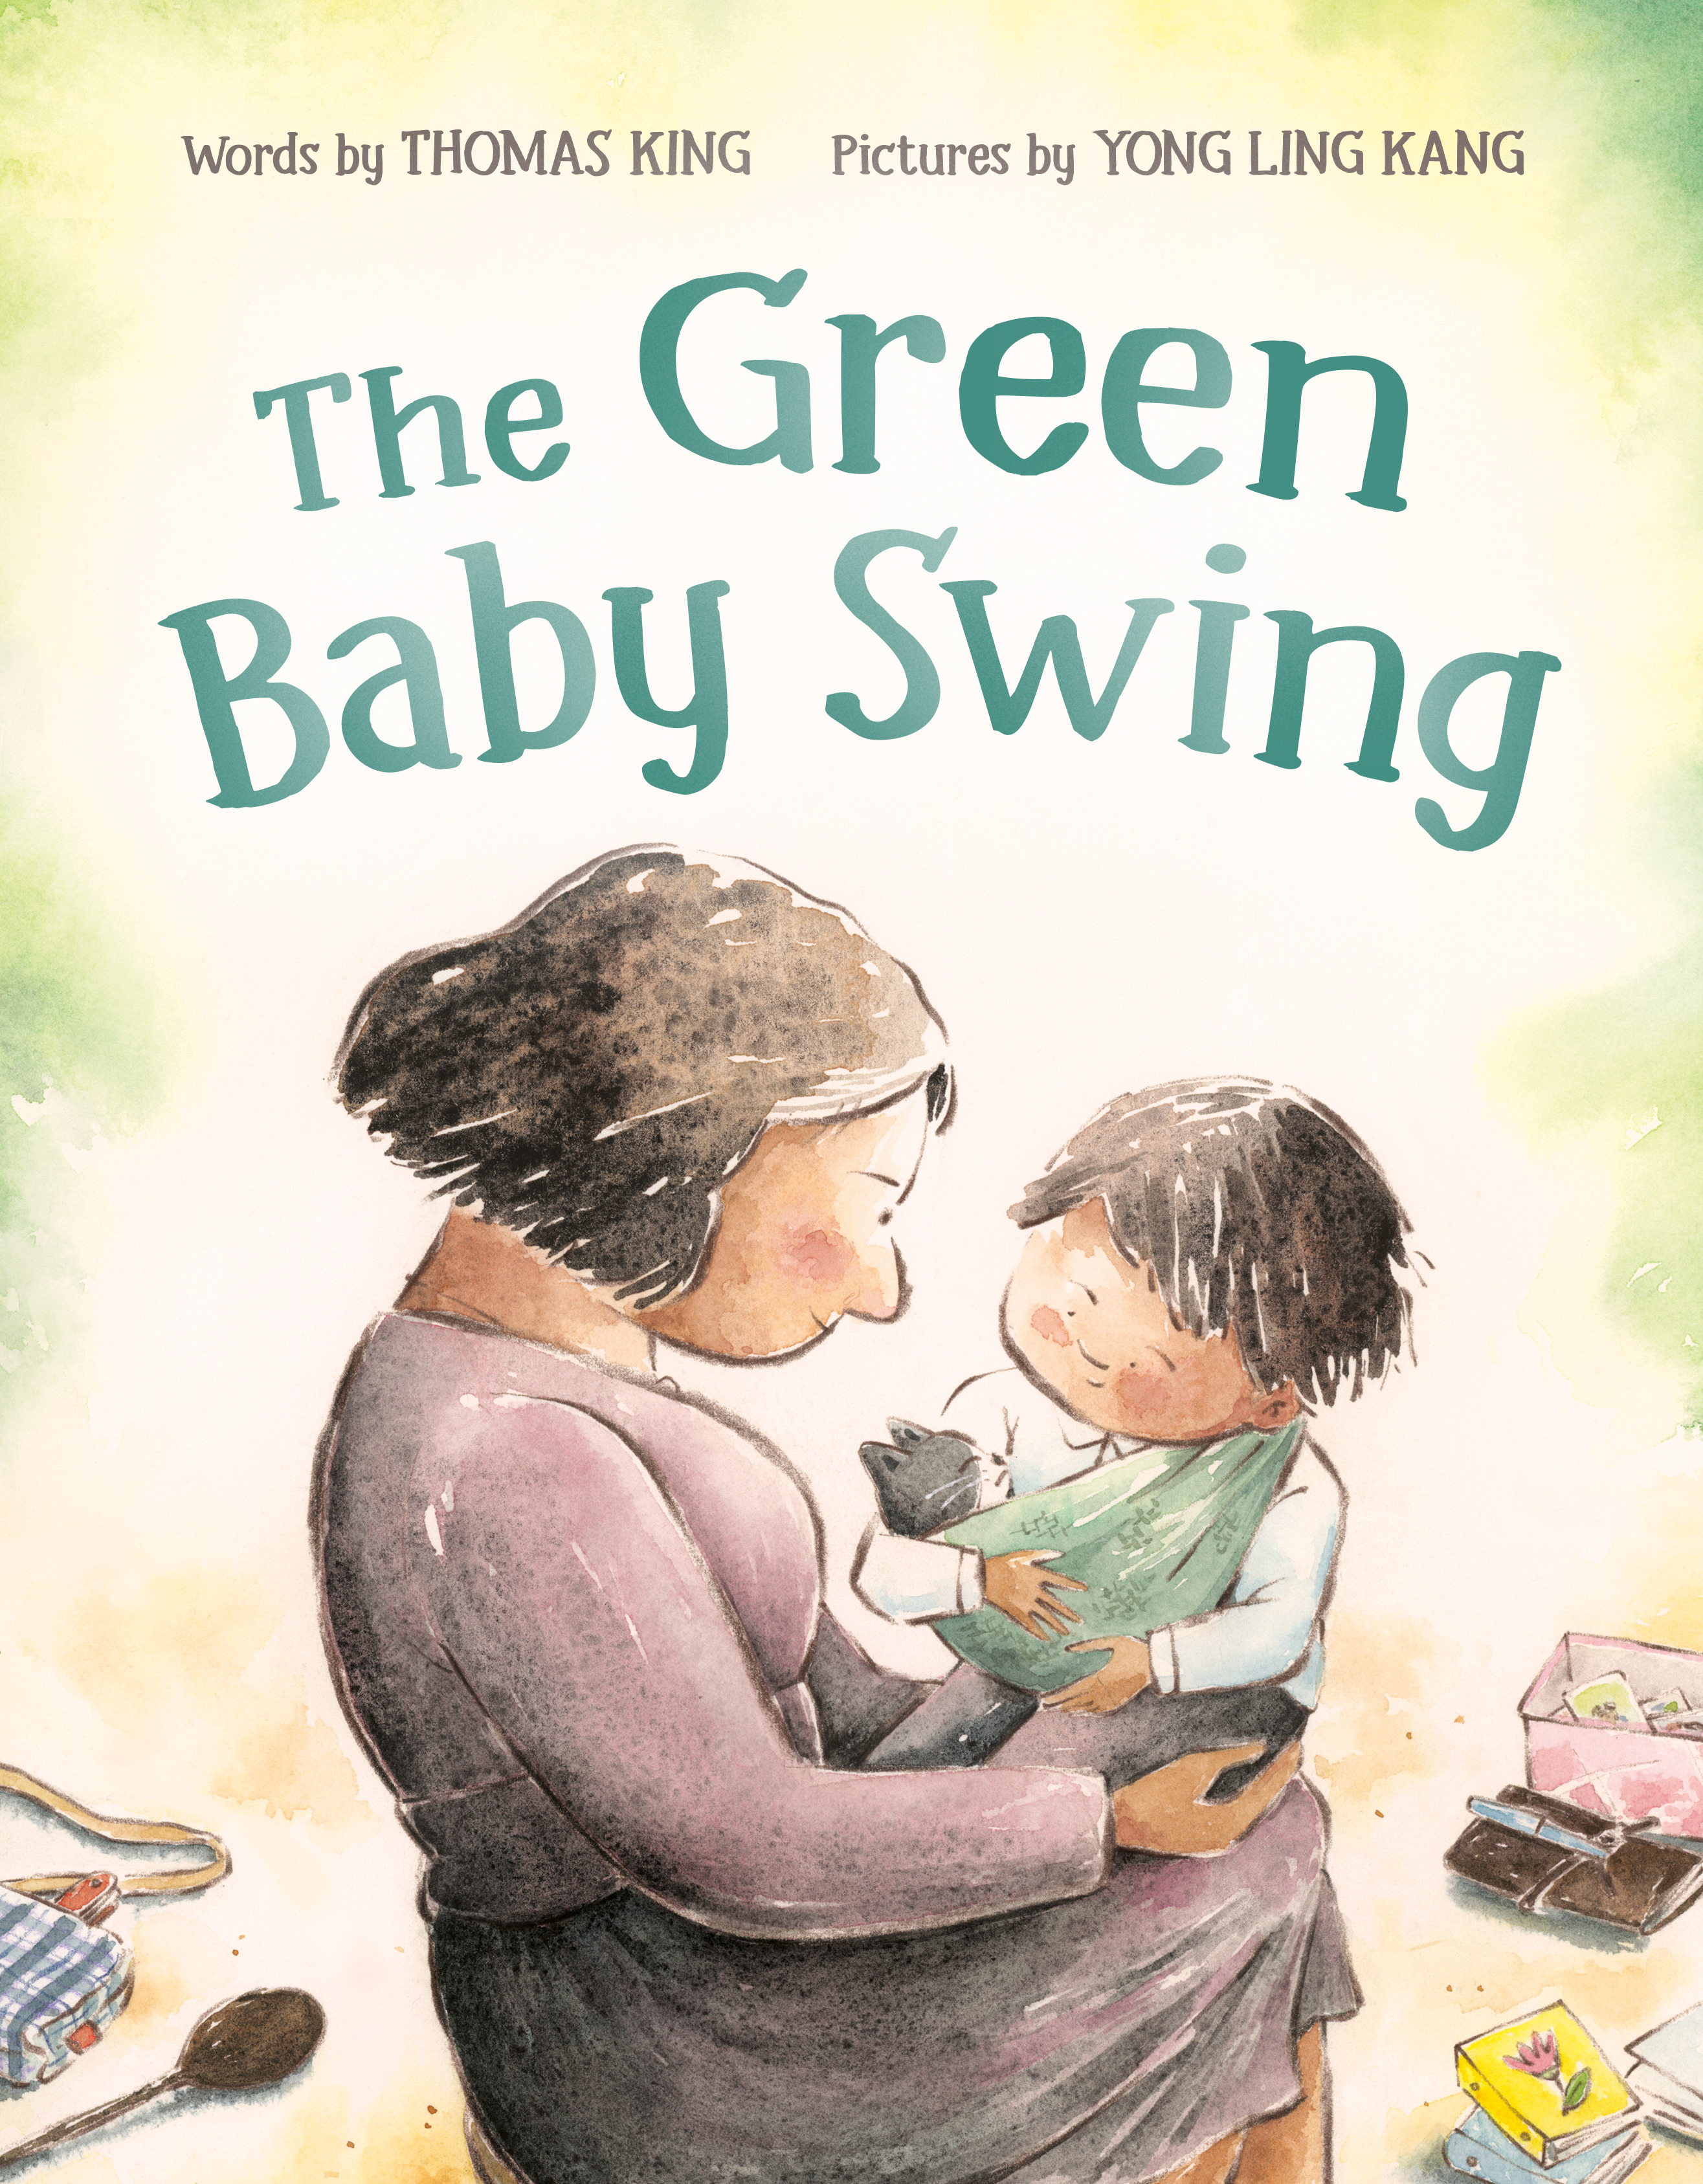 Green Baby Swing, The